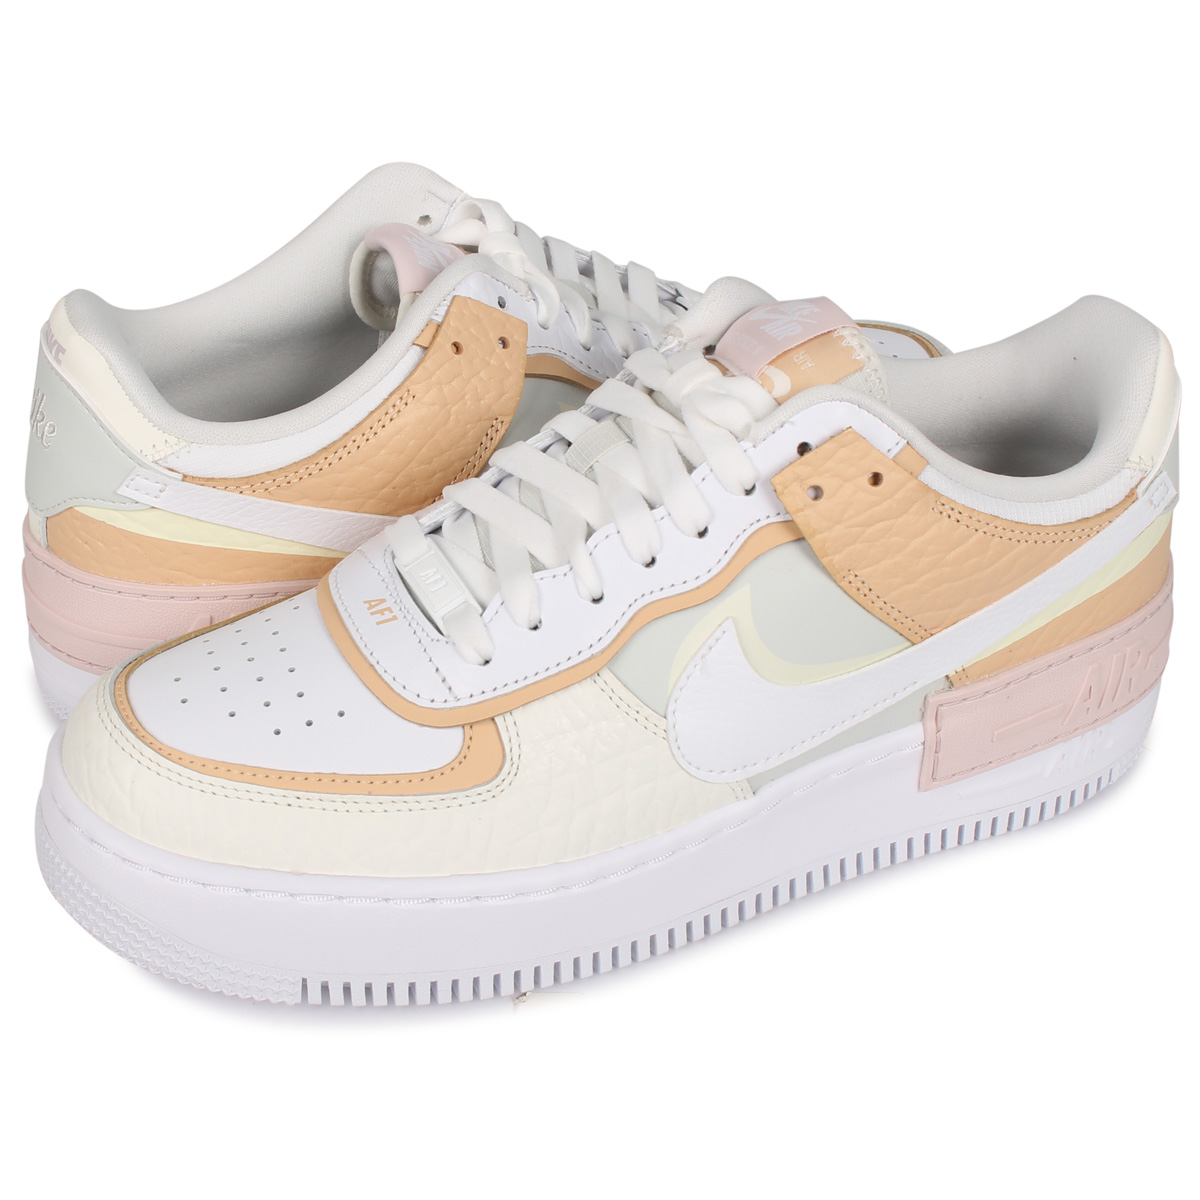 airforce 1 shadow womens